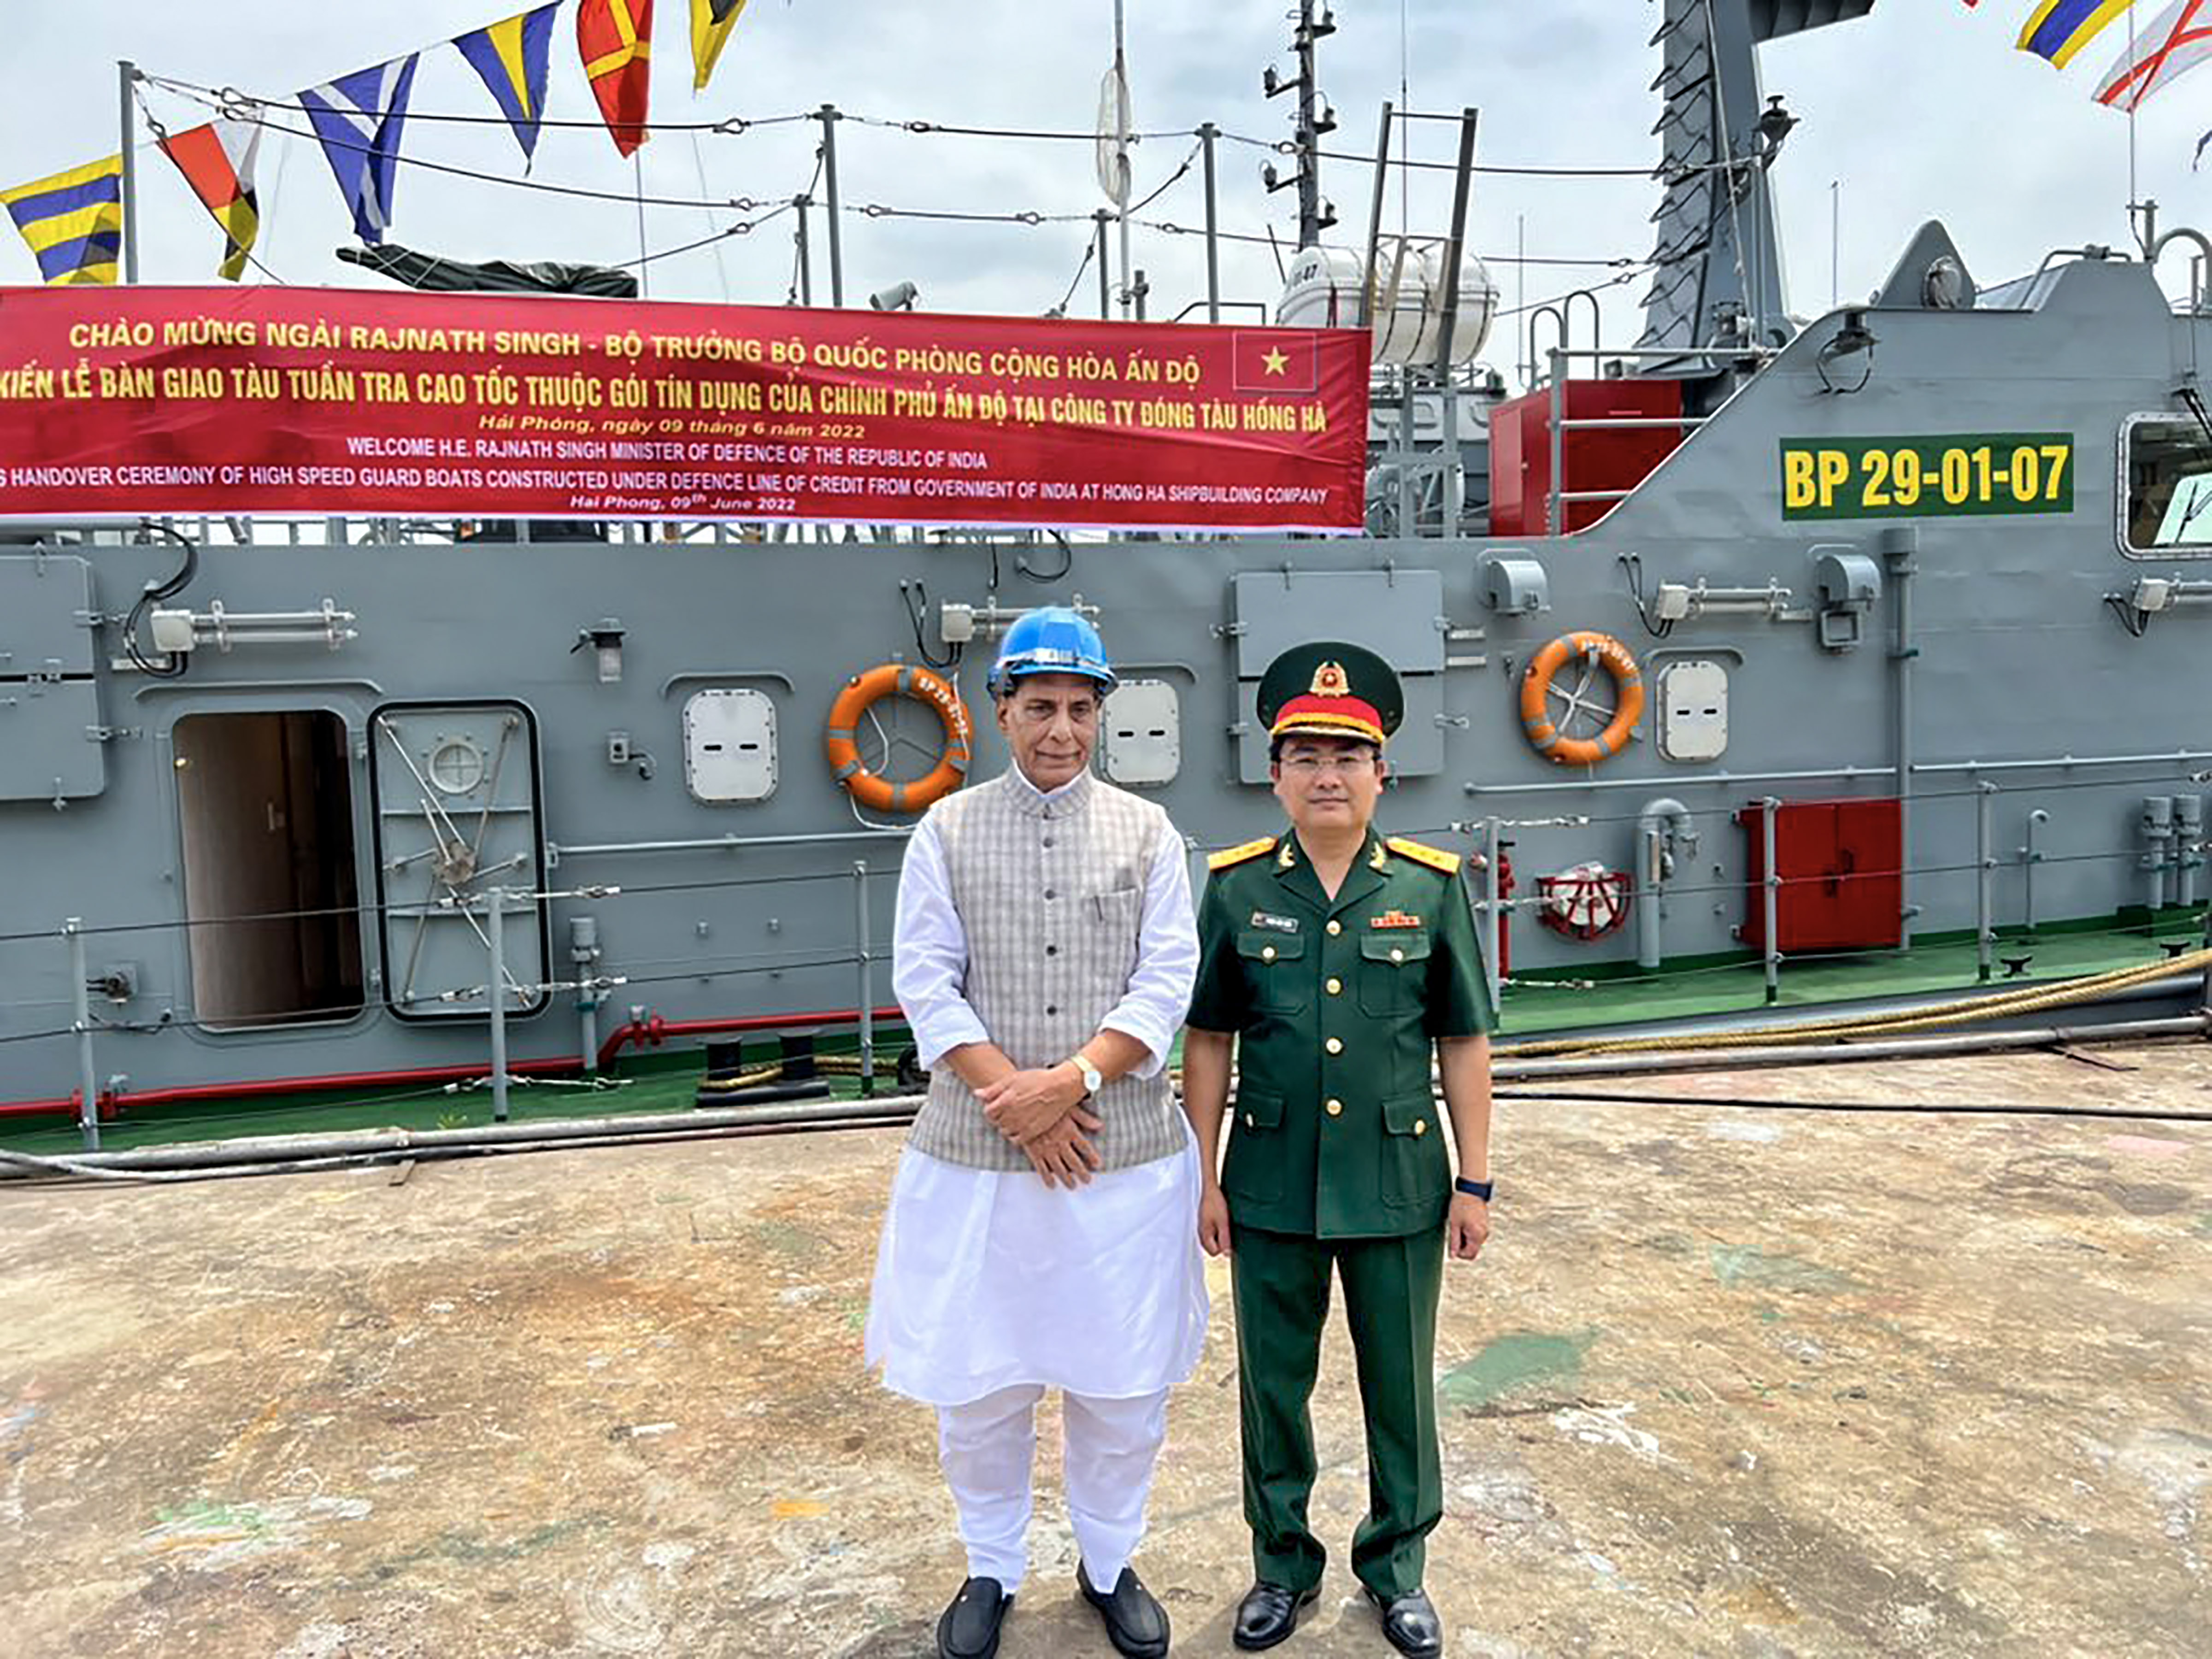 India hands over 12 guard boats to Vietnam